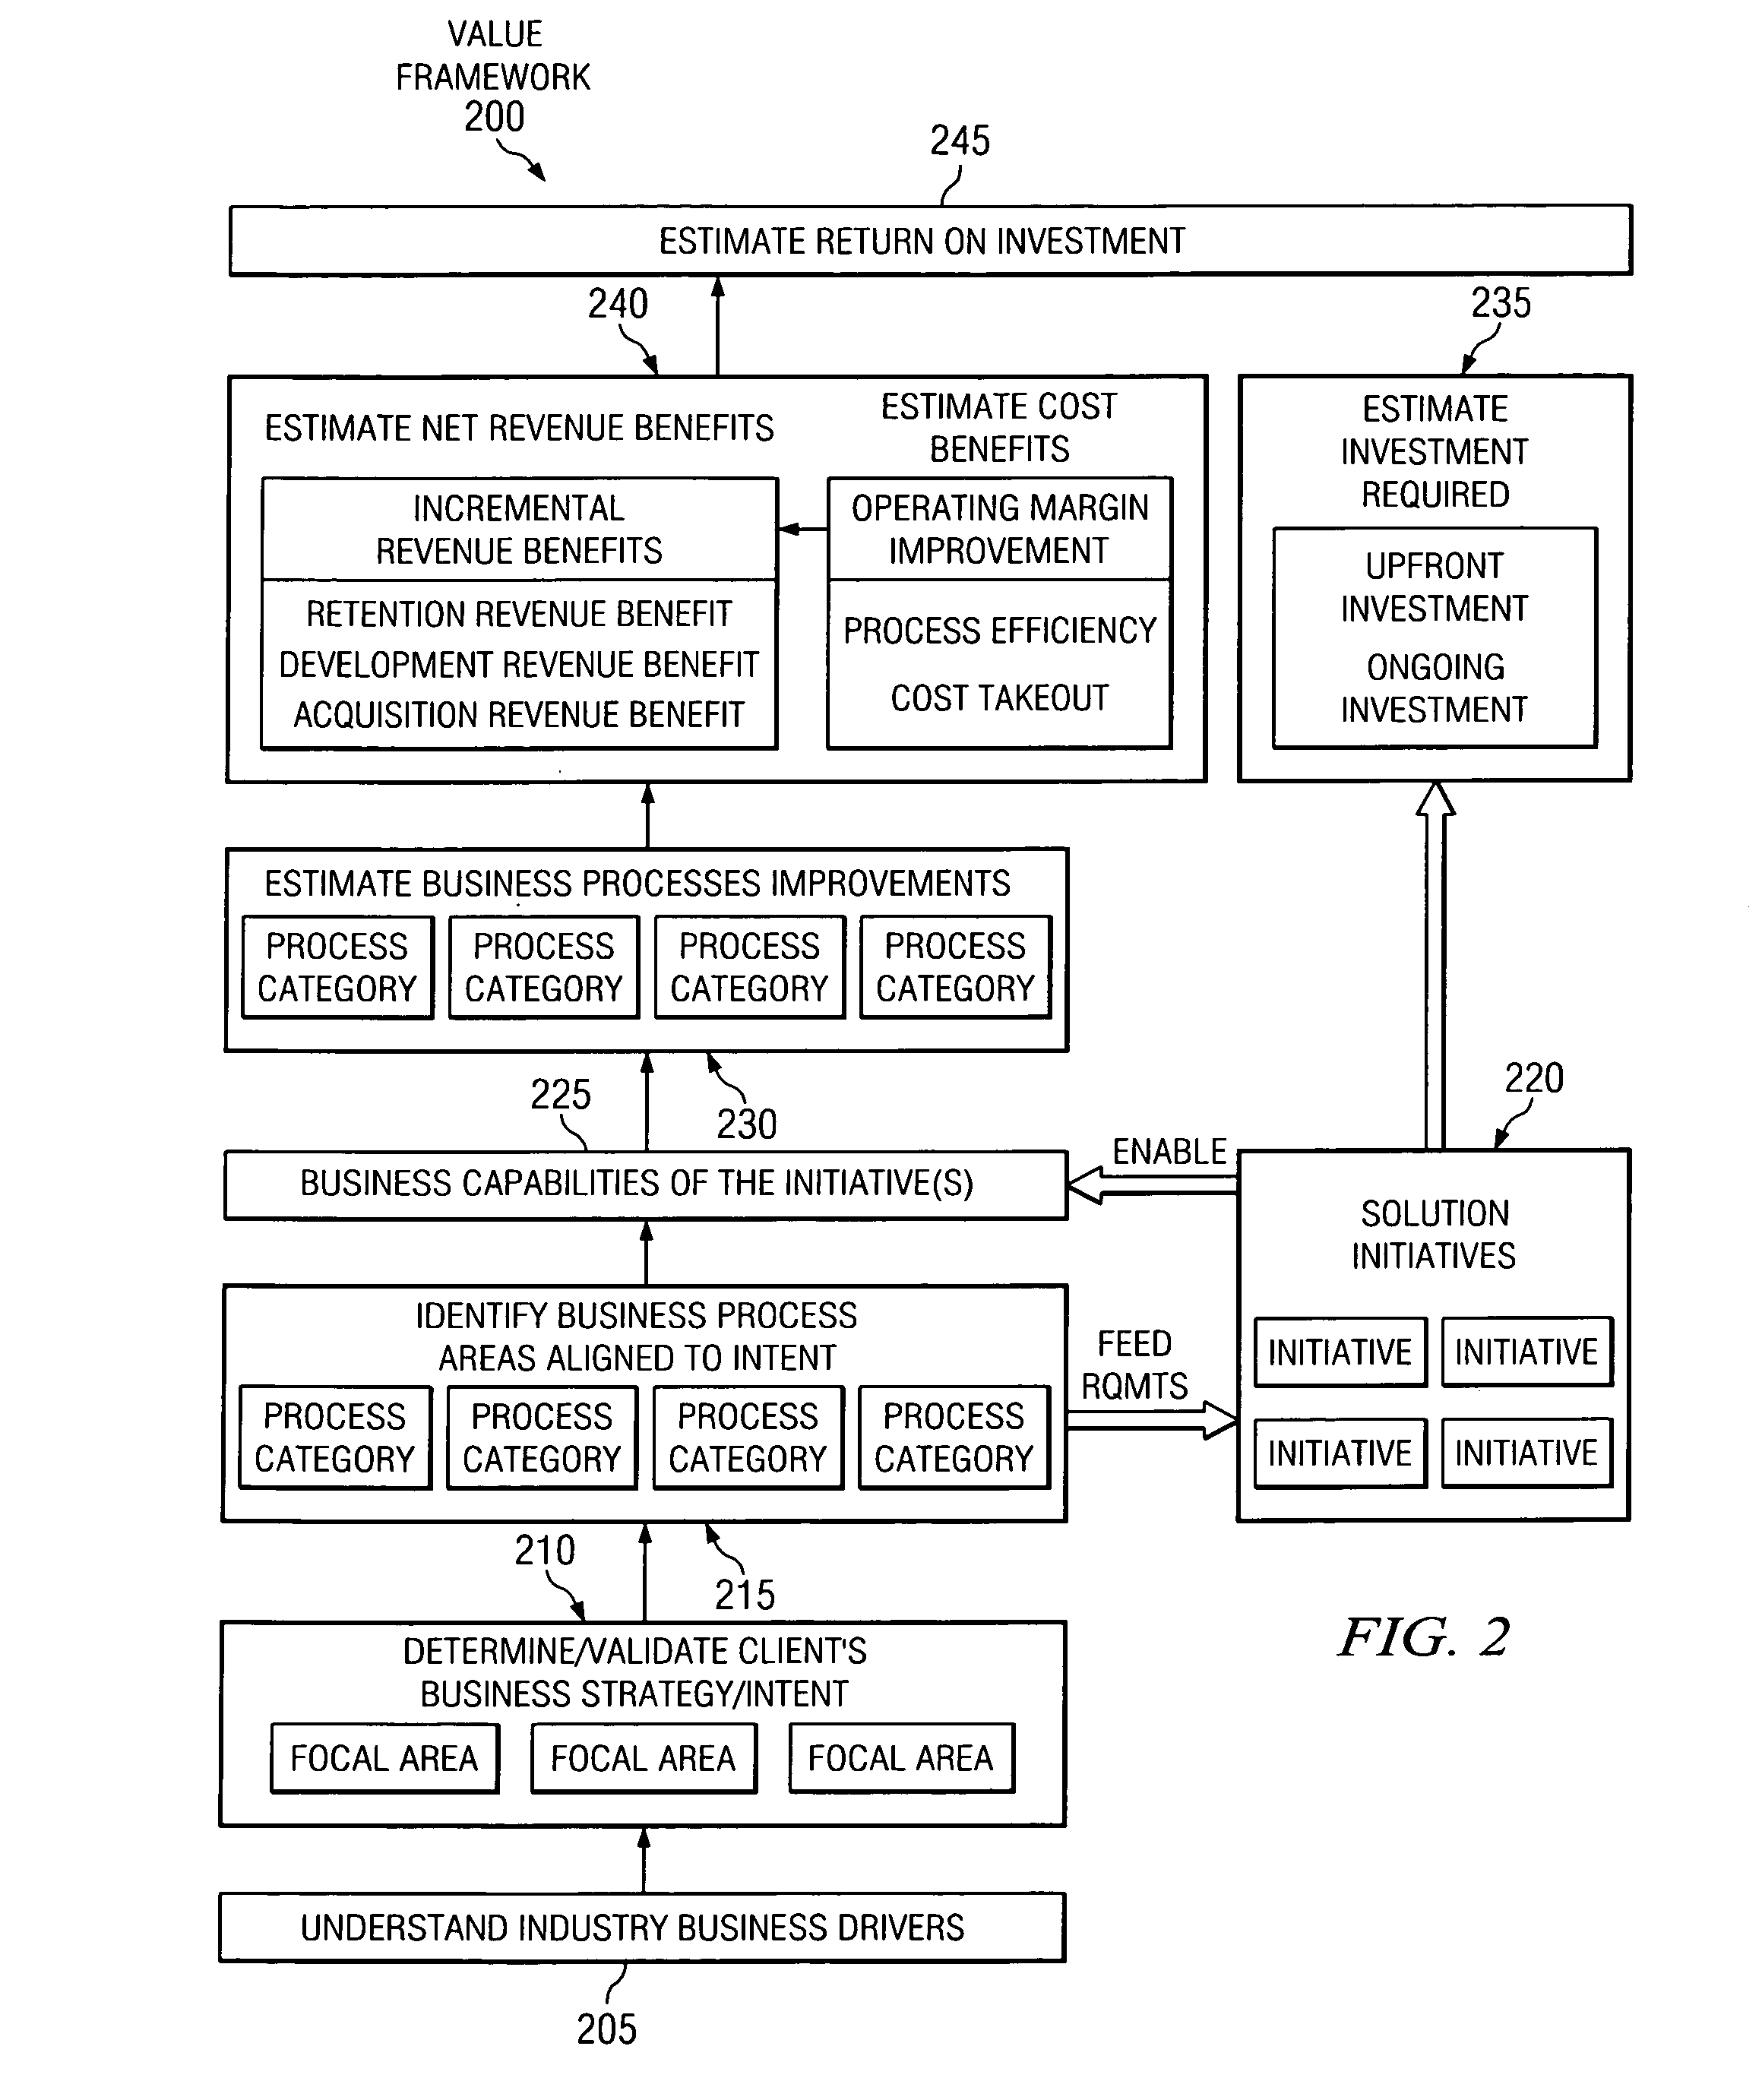 Method and apparatus for a value framework and return on investment model